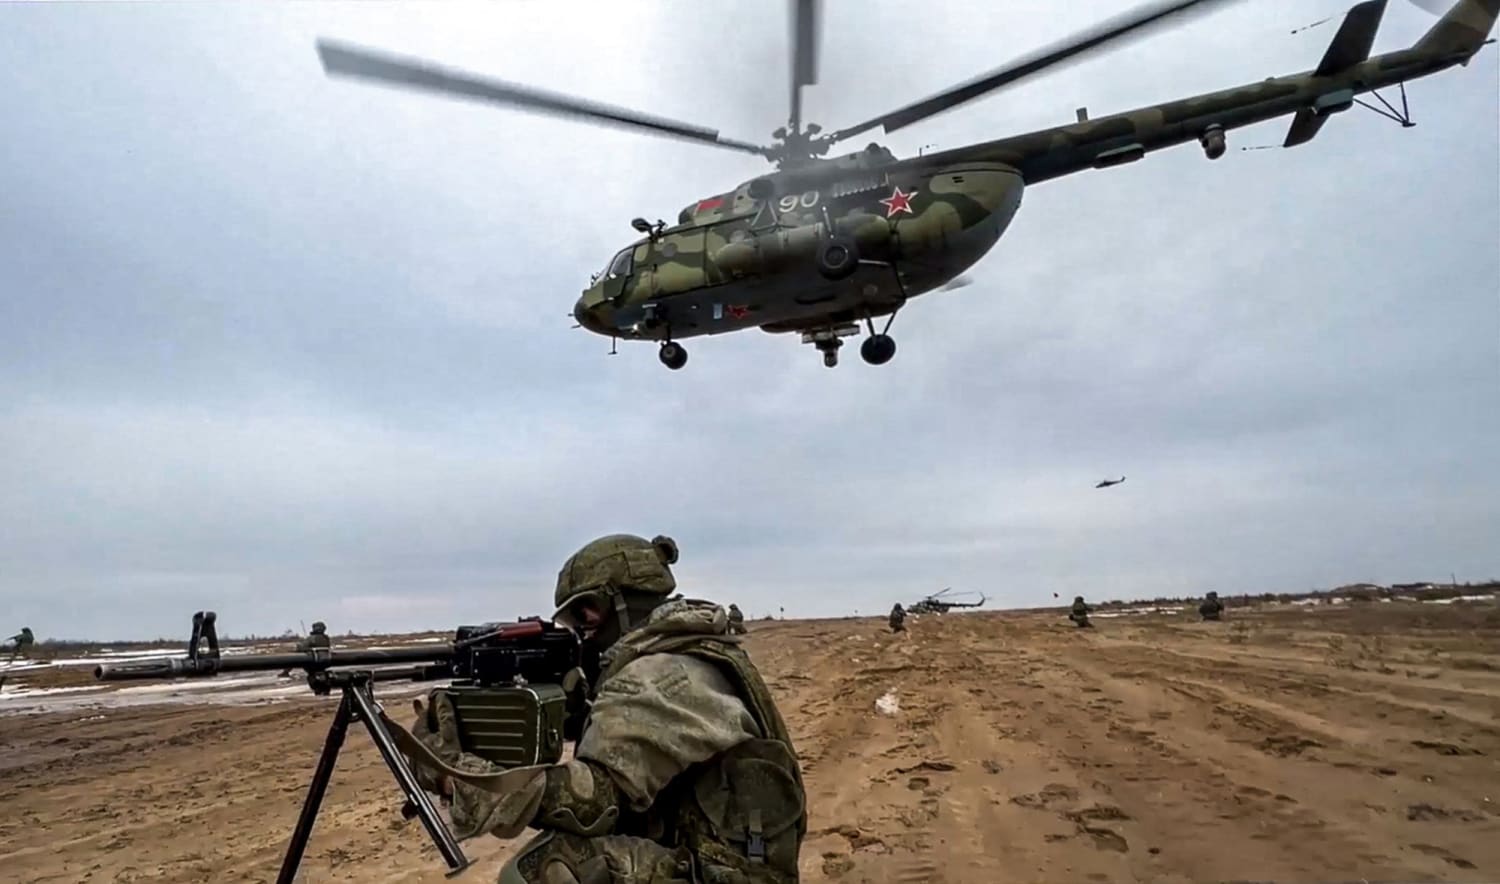 U.S. intel agencies: Up to 4,000 Russian soldiers have died in Ukraine invasion